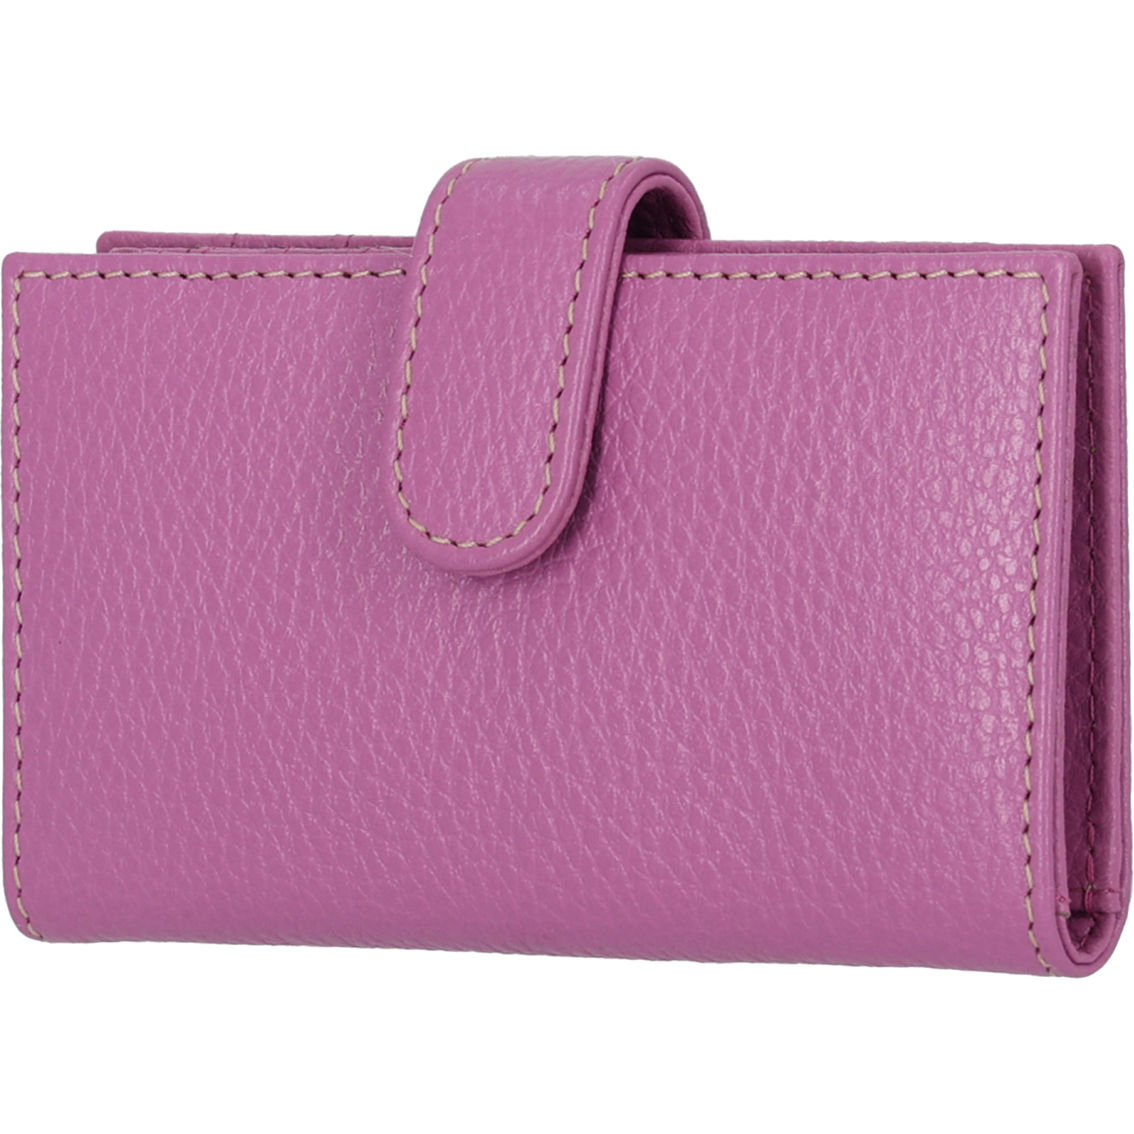 Mundi Mulberry Leather Debbie Card Case | Wallets | Clothing ...